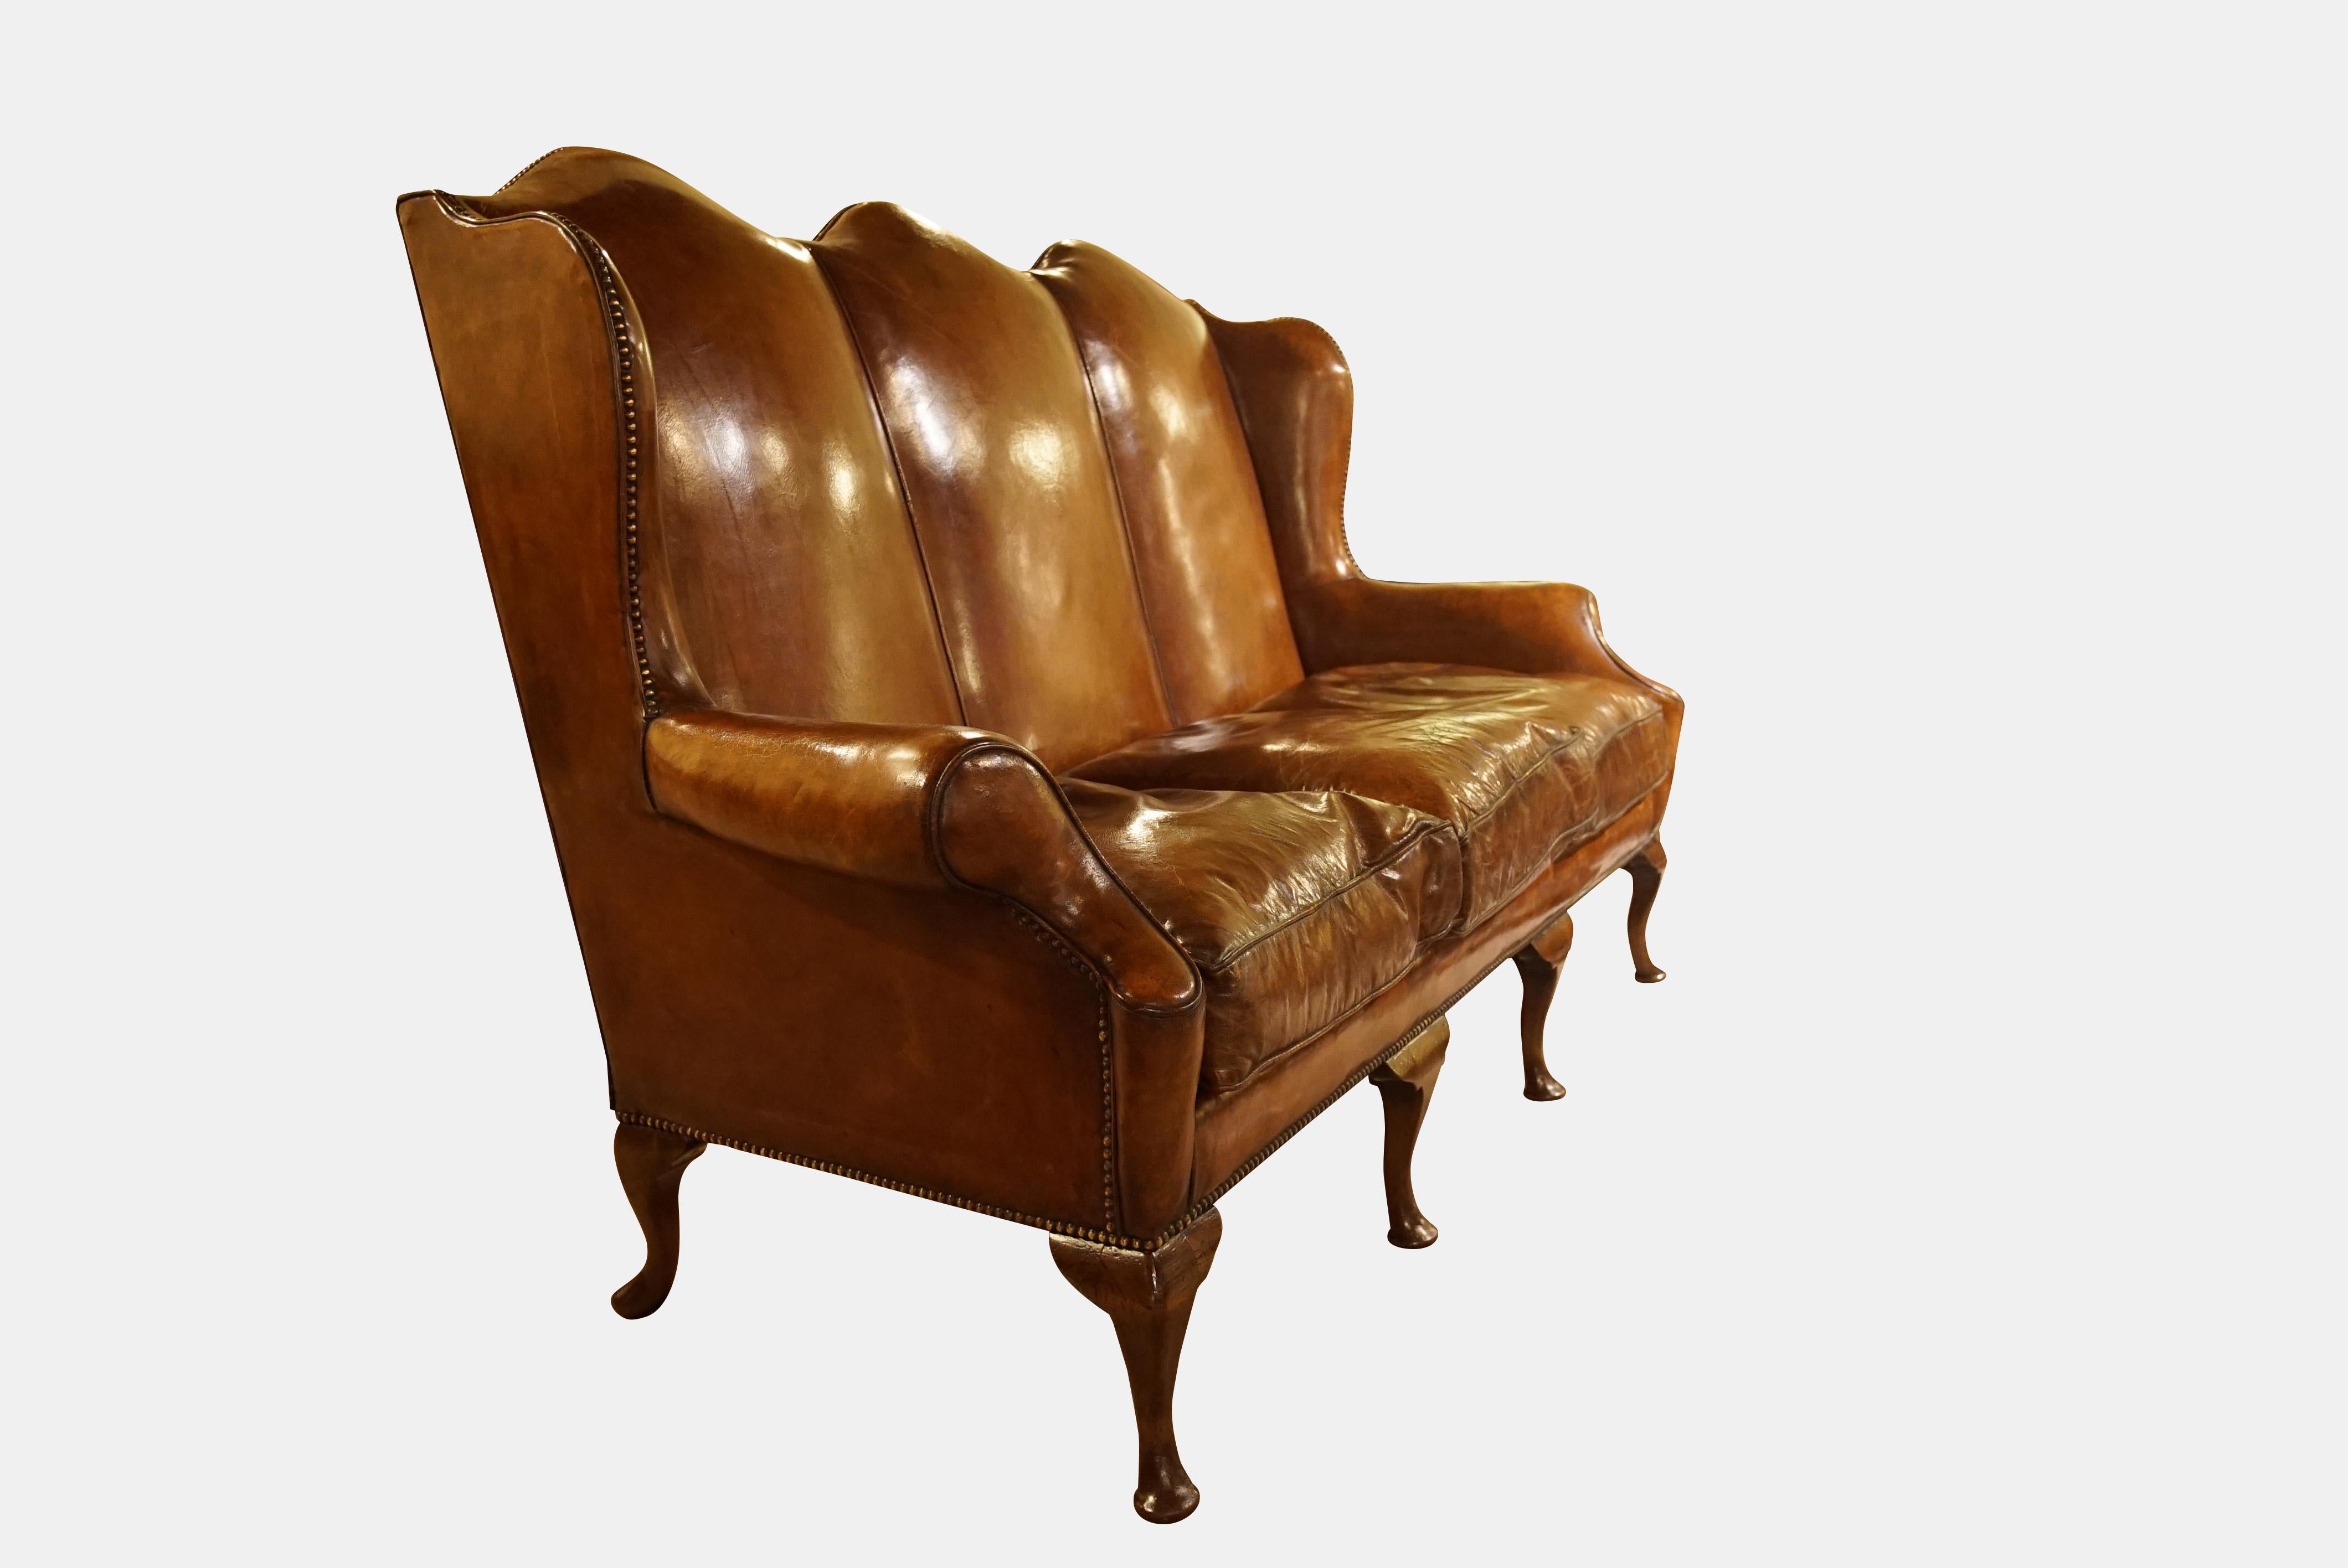 A superb Queen Anne style triple back leather settee, raised on cabriole legs, close nailed wings and scroll arms, all in a warm antique brown hide with feather cushions - exceedingly comfortable,

circa 1910.